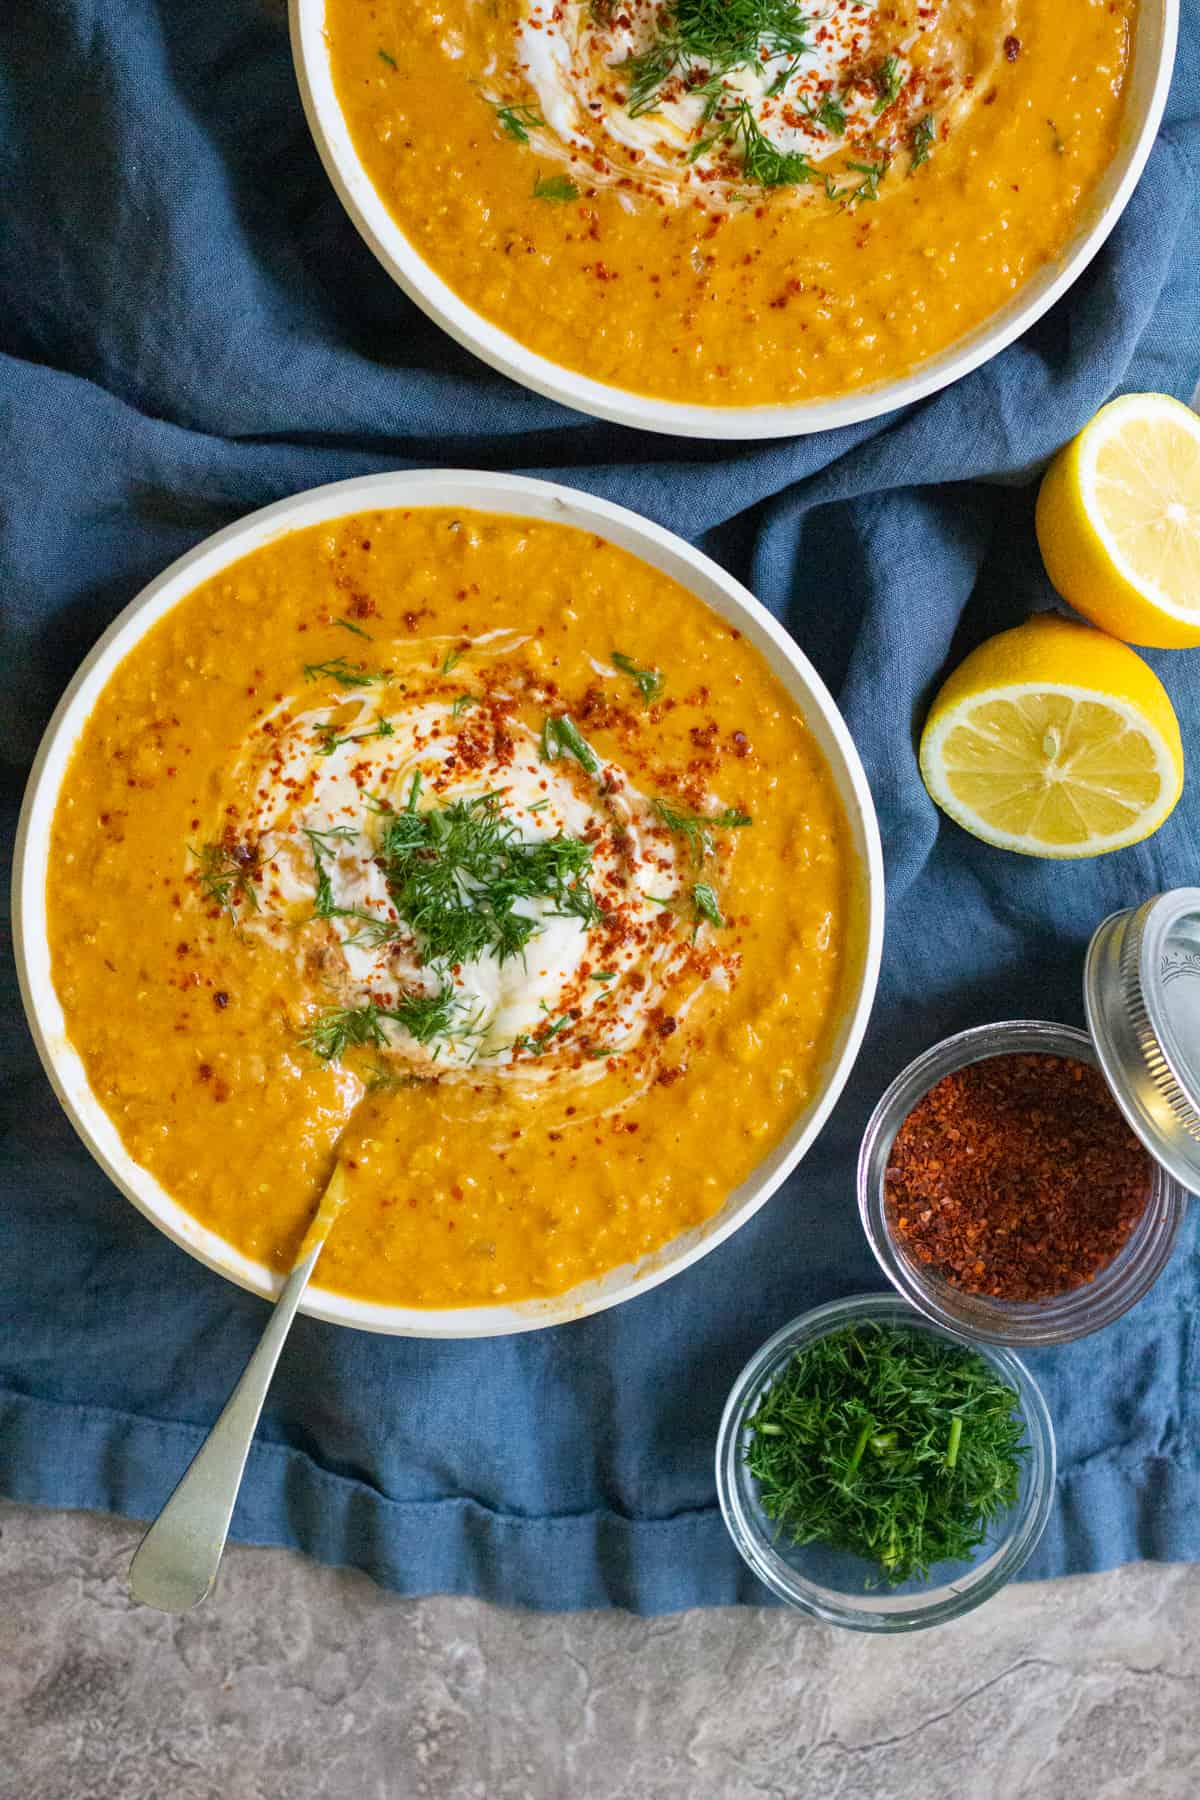 This easy lentil soup is flavored with coconut milk.